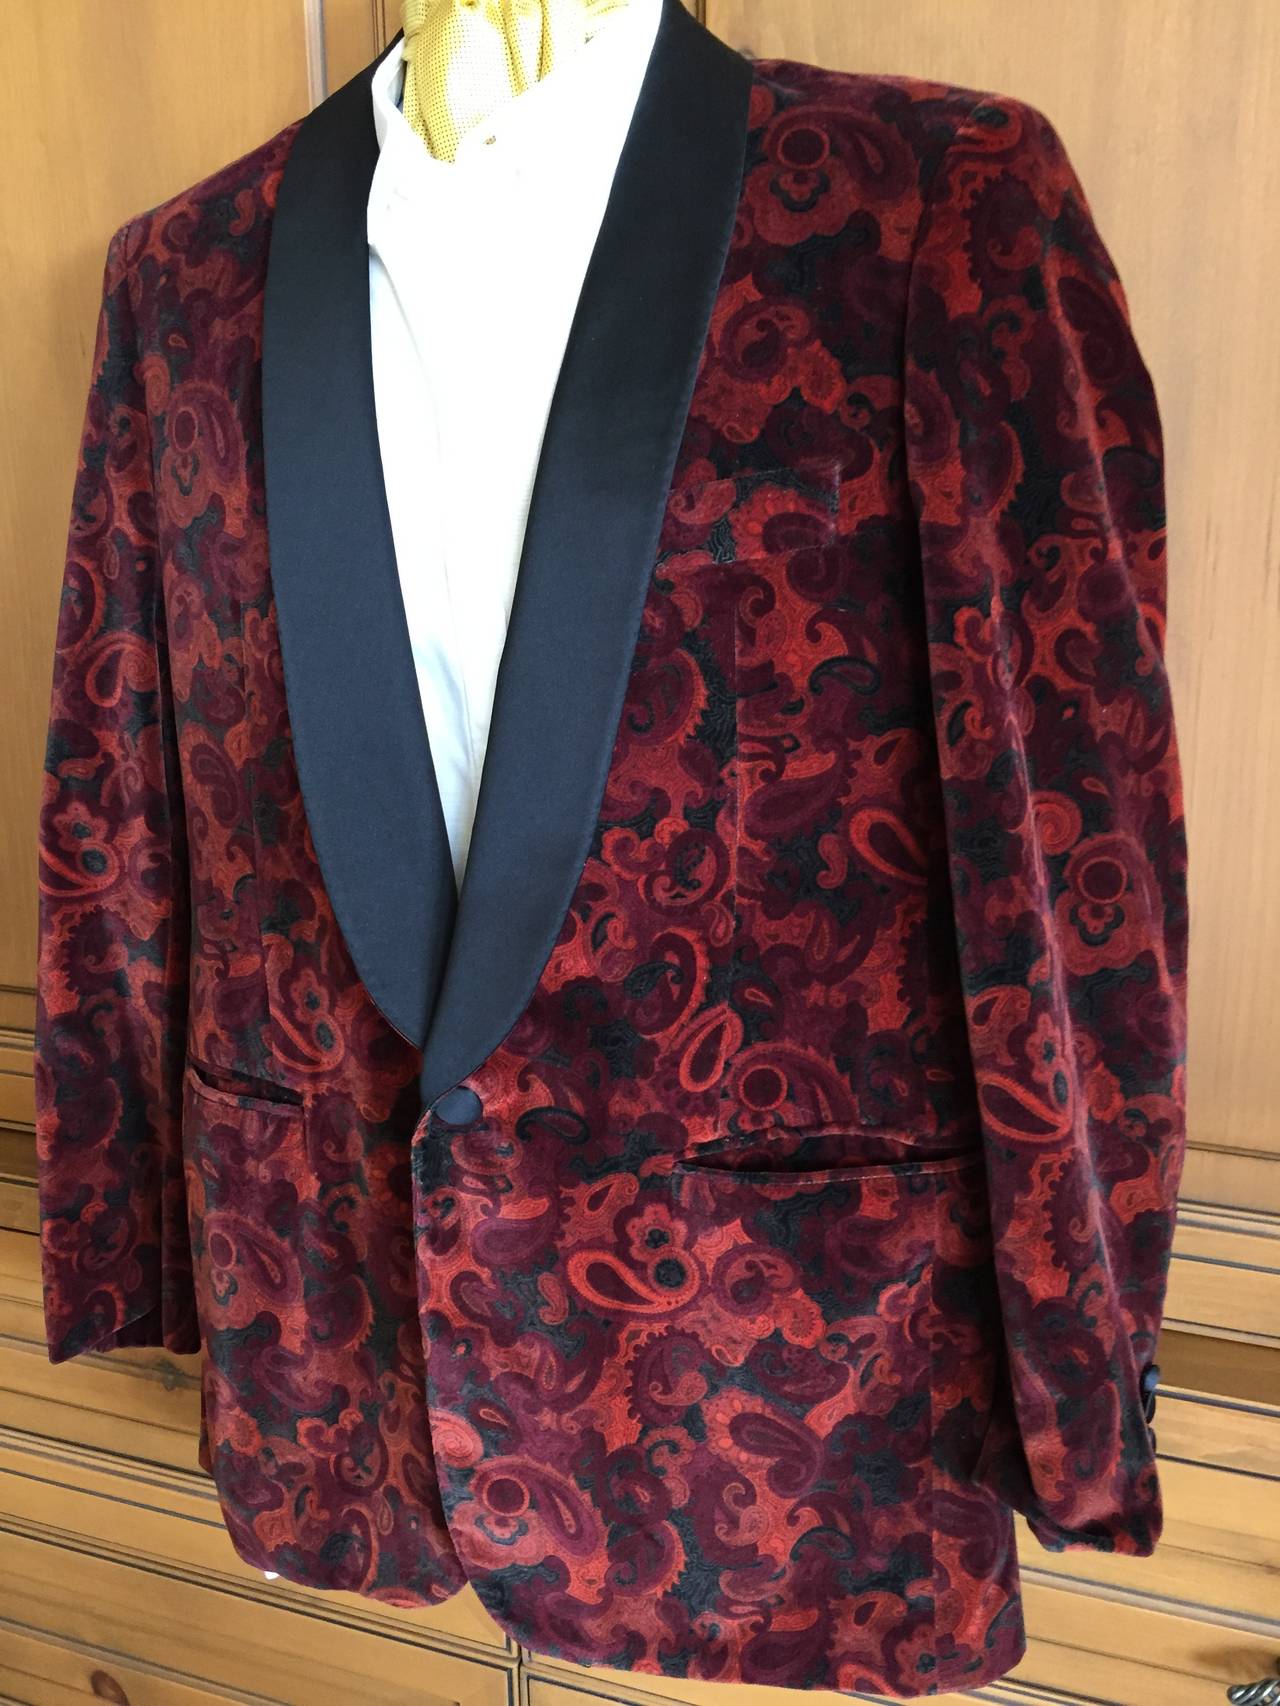 Sulka Vintage Velvet Smoking Jacket w Satin Shawl Collar Lapels.
Made in France by Sulka
Marked 44
 Fits more like sz 38- 40 
Appx Measurements
Chest  40